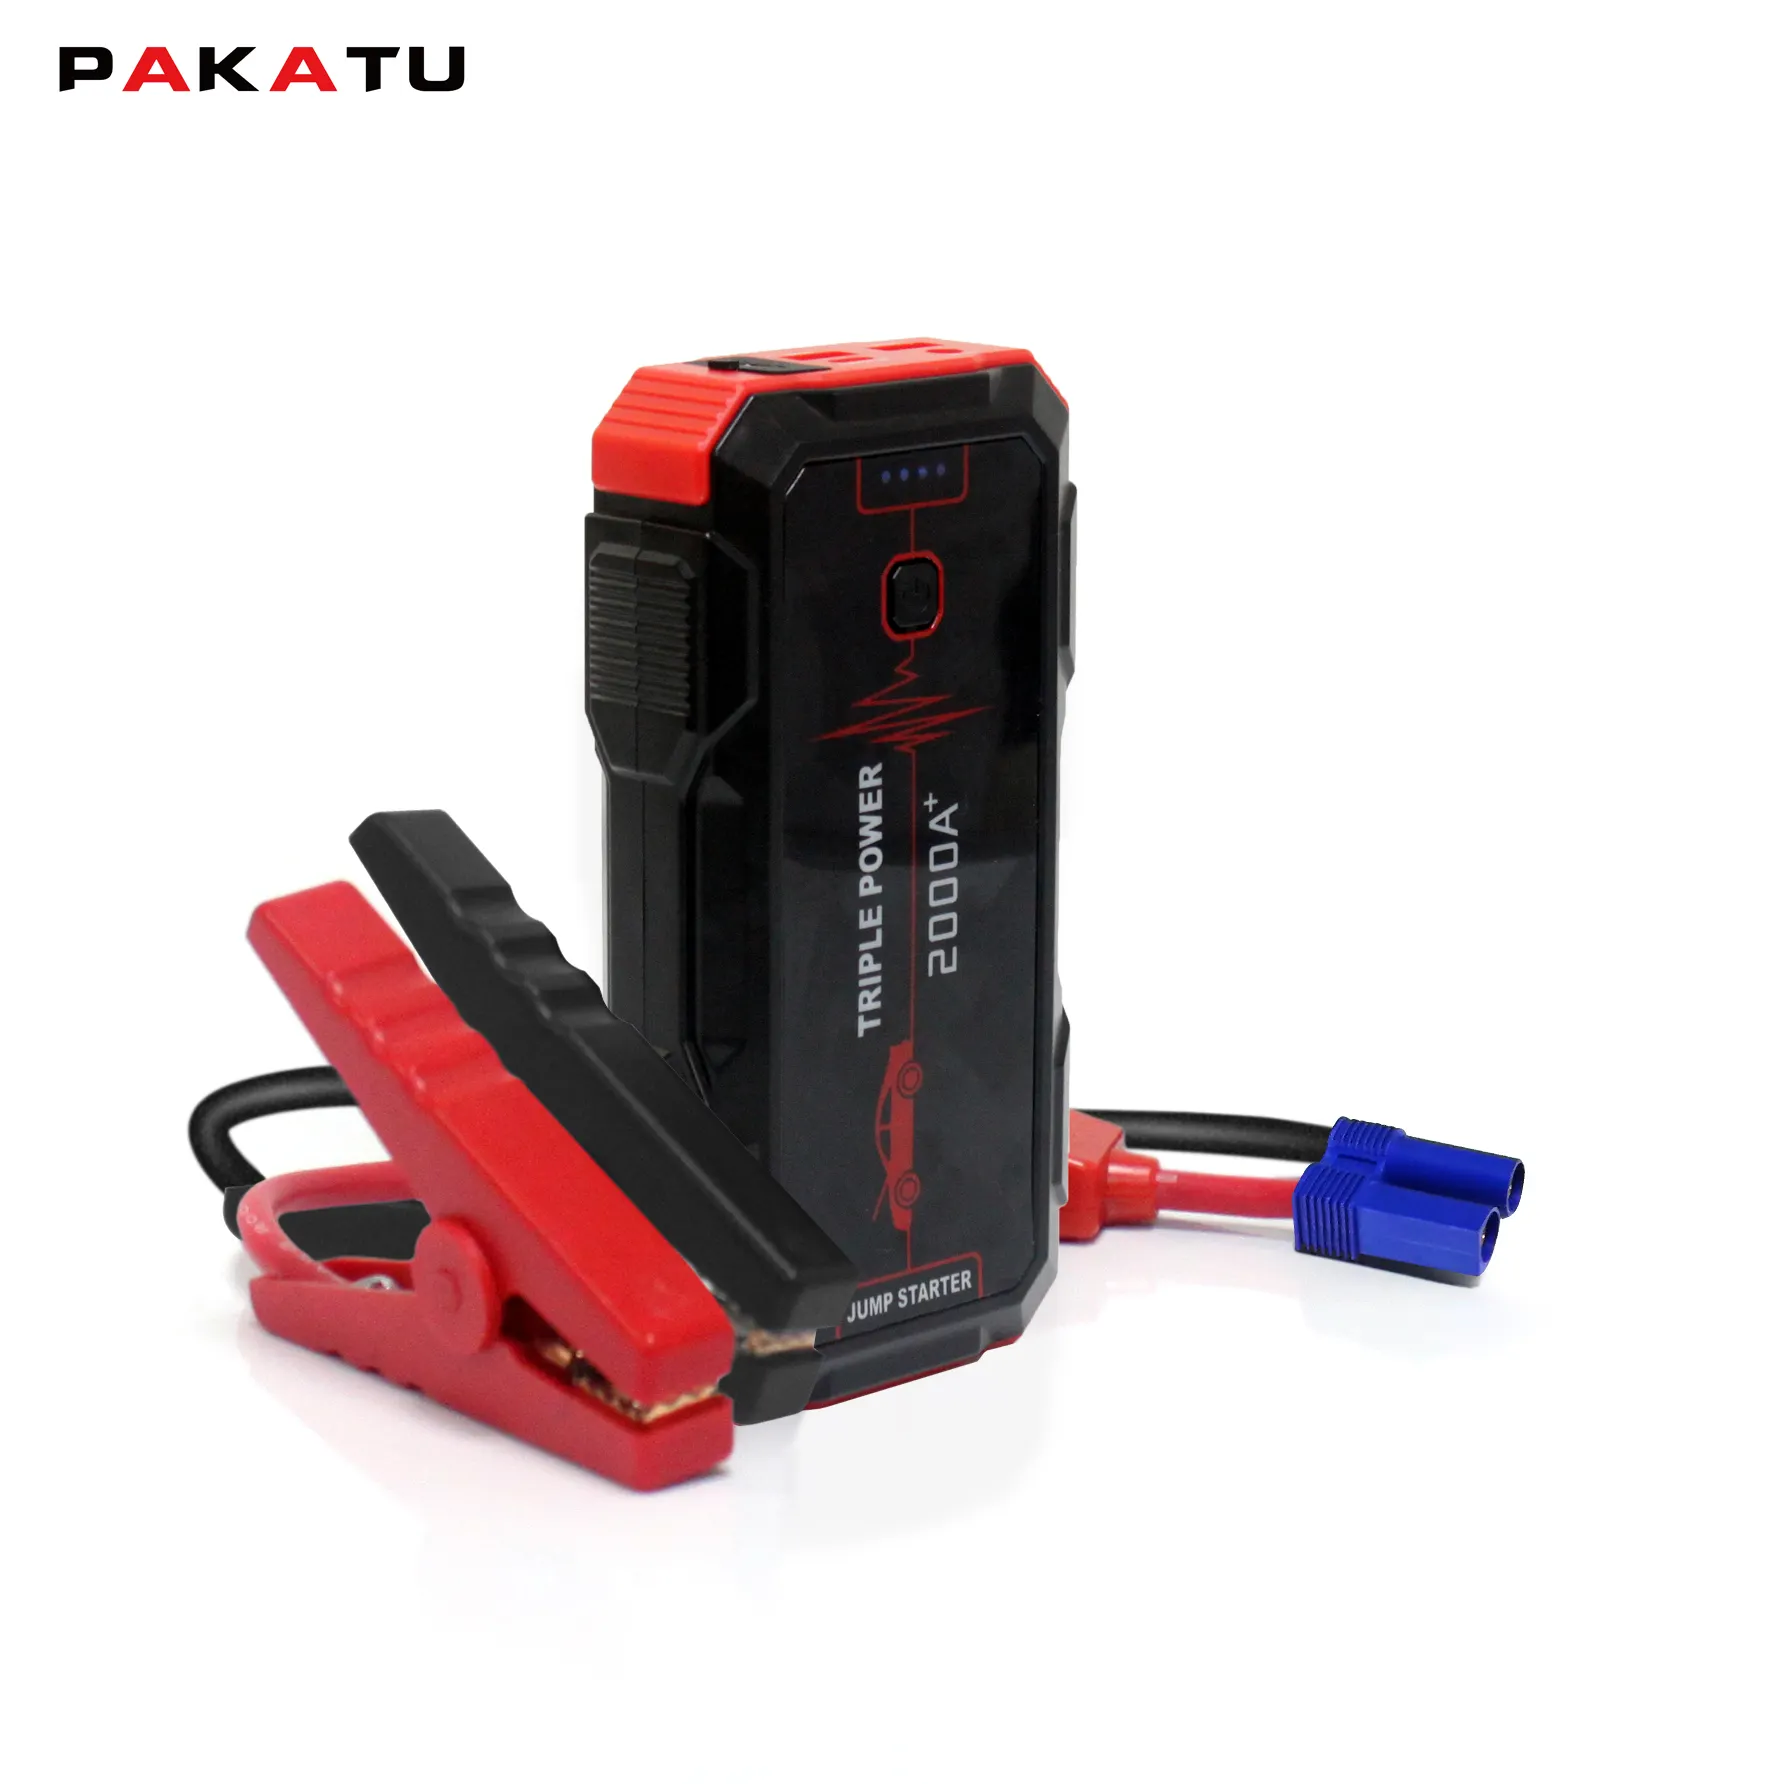 Car Battery Starter 20000mAh 12V Power Pack with USB Quick Charge 3.0 Up to 6L Gas or 4L Diesel Engine